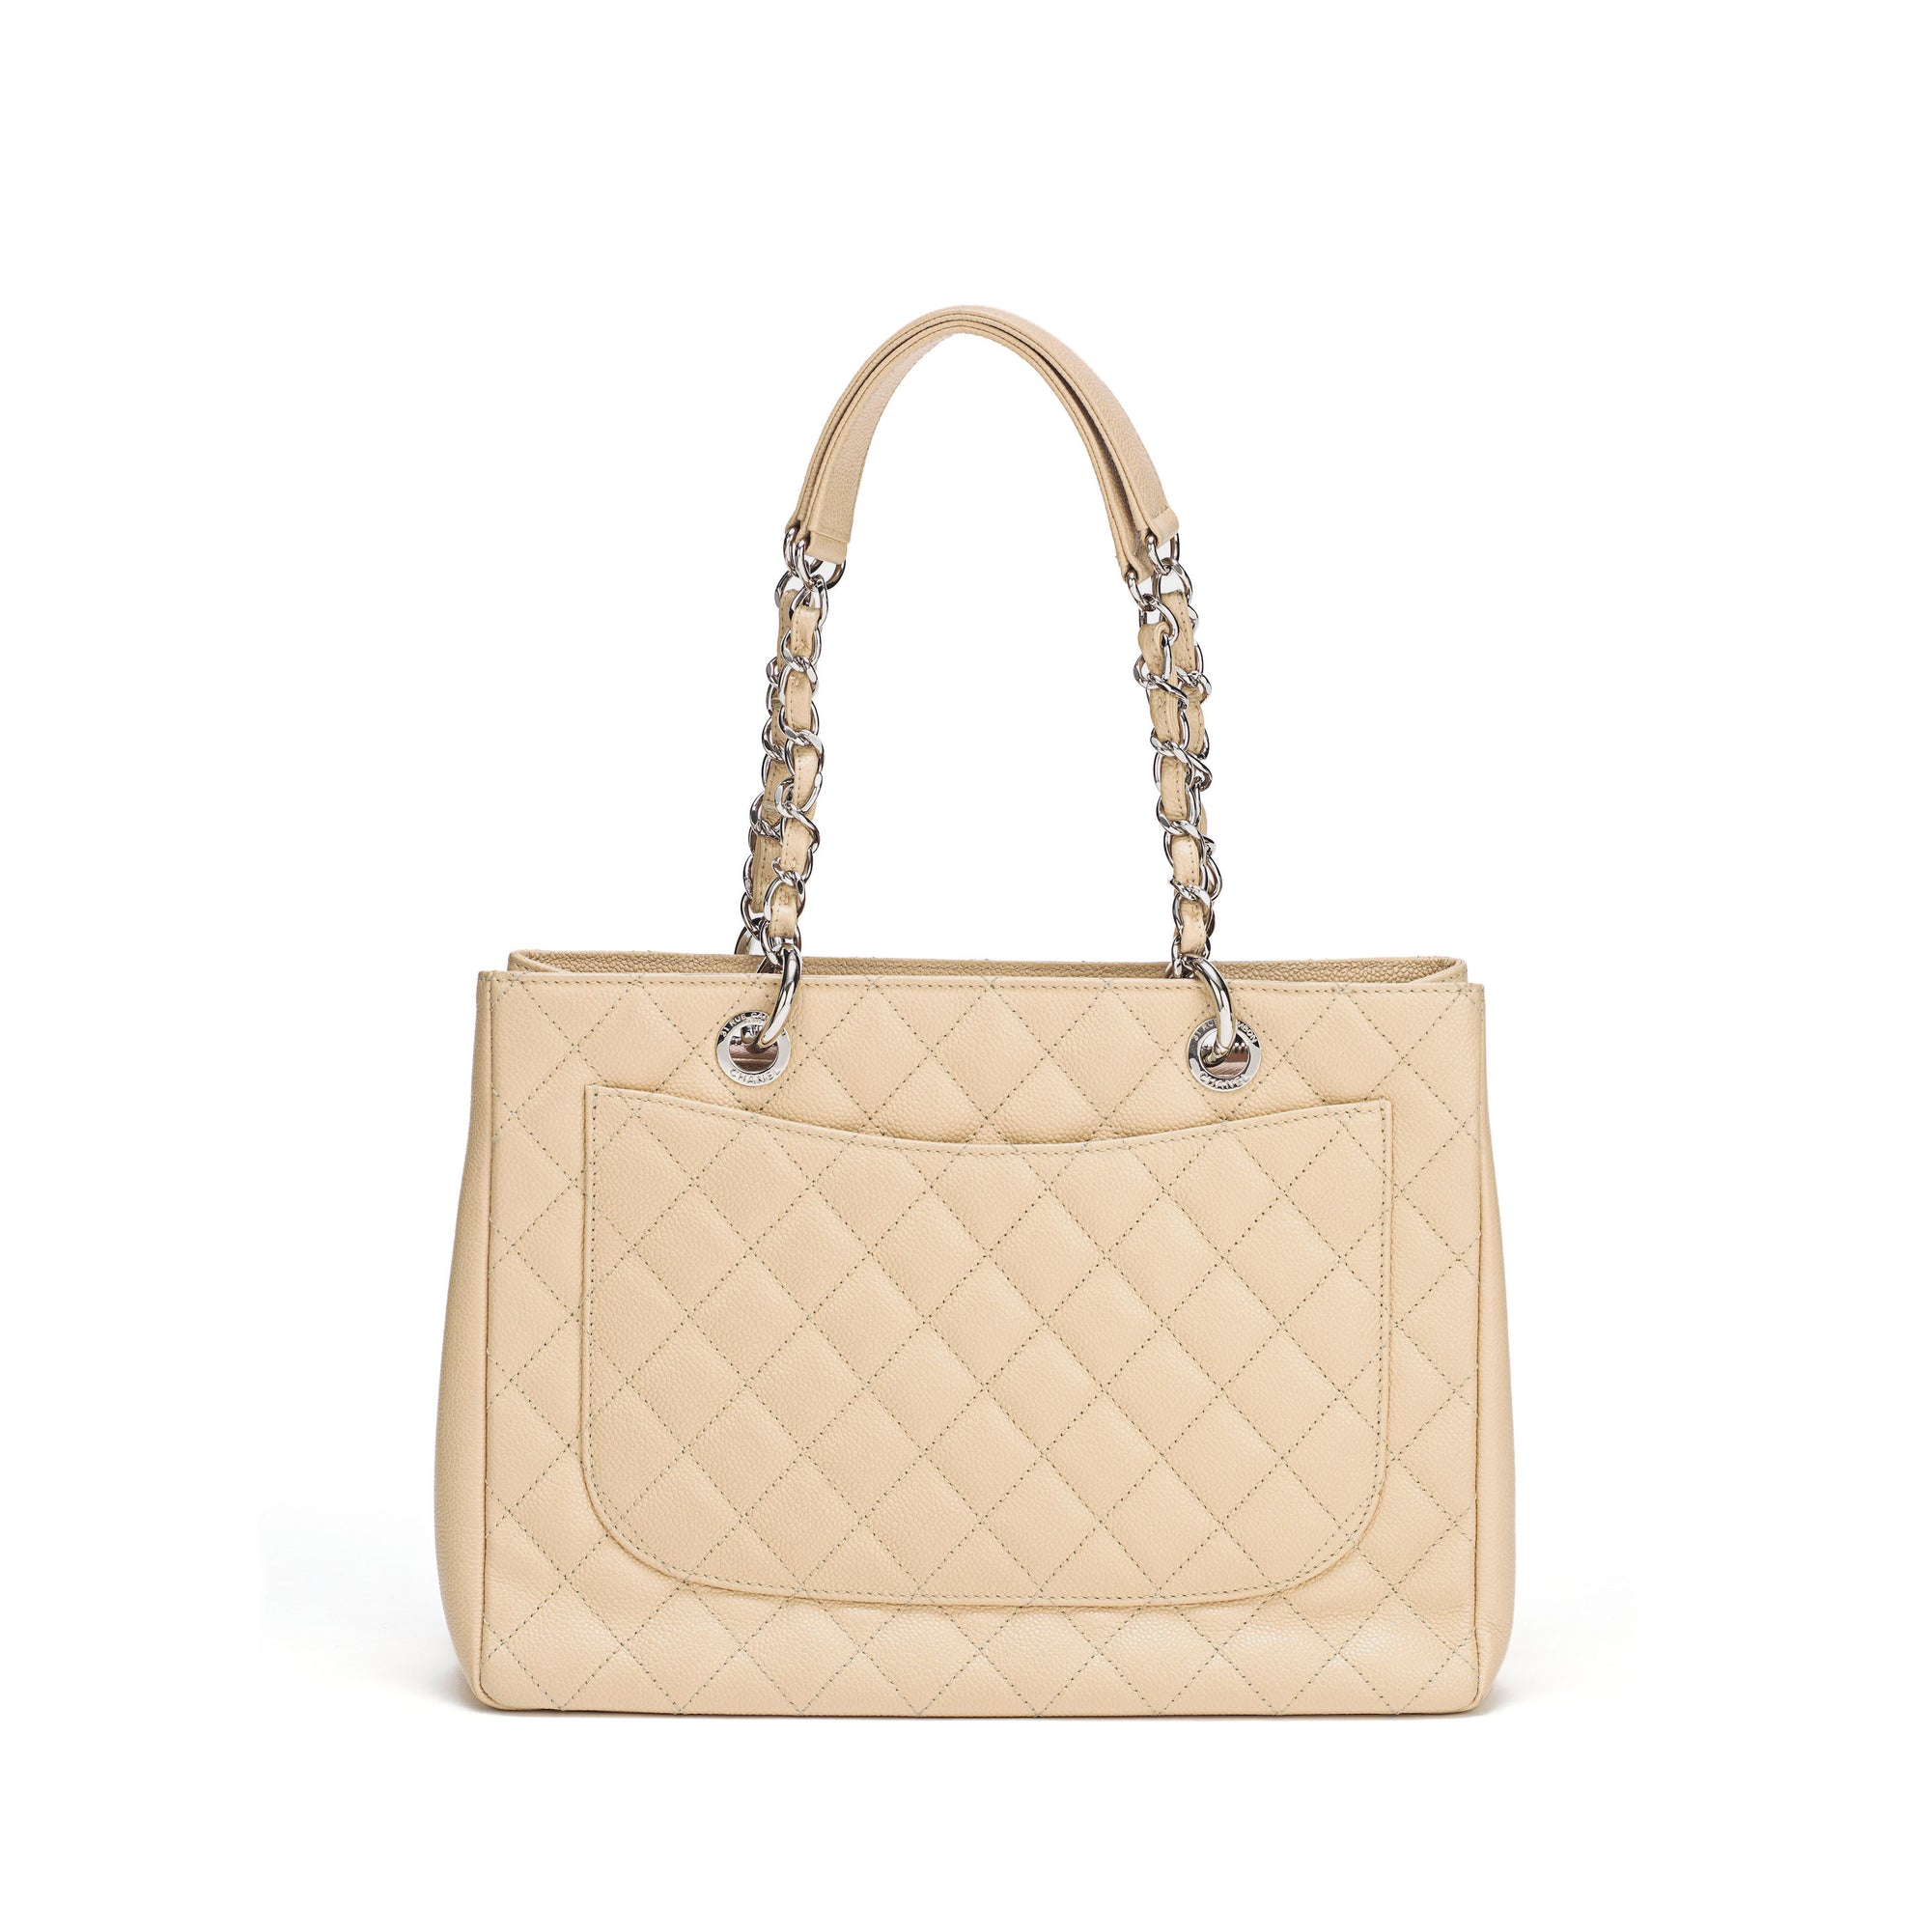 CHANEL Calfskin Stitched Large Shopping Tote Beige 1195336